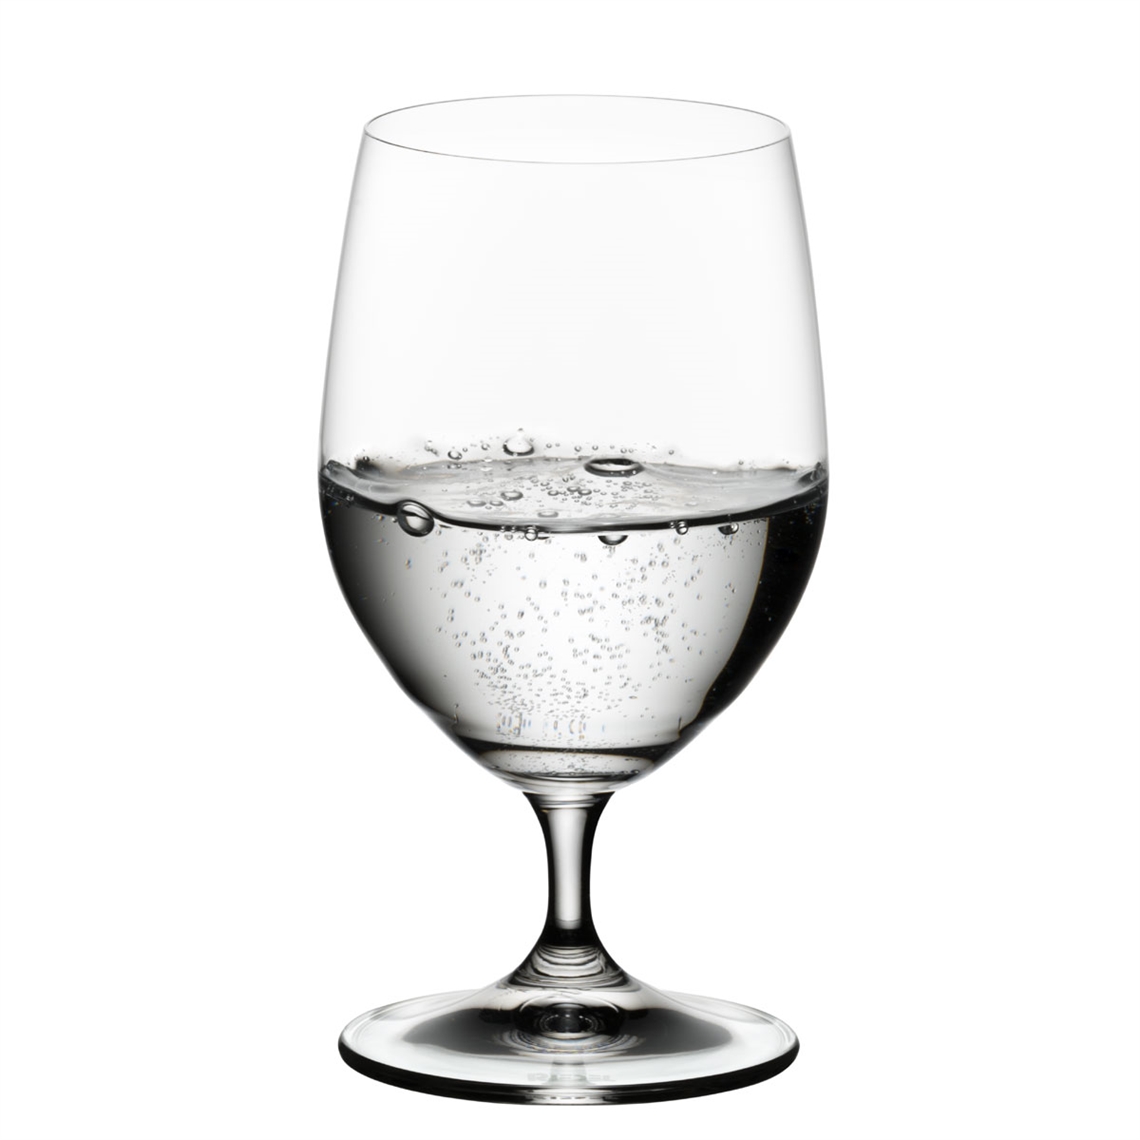 View more water glasses / tumblers from our Stemmed Water Glasses range